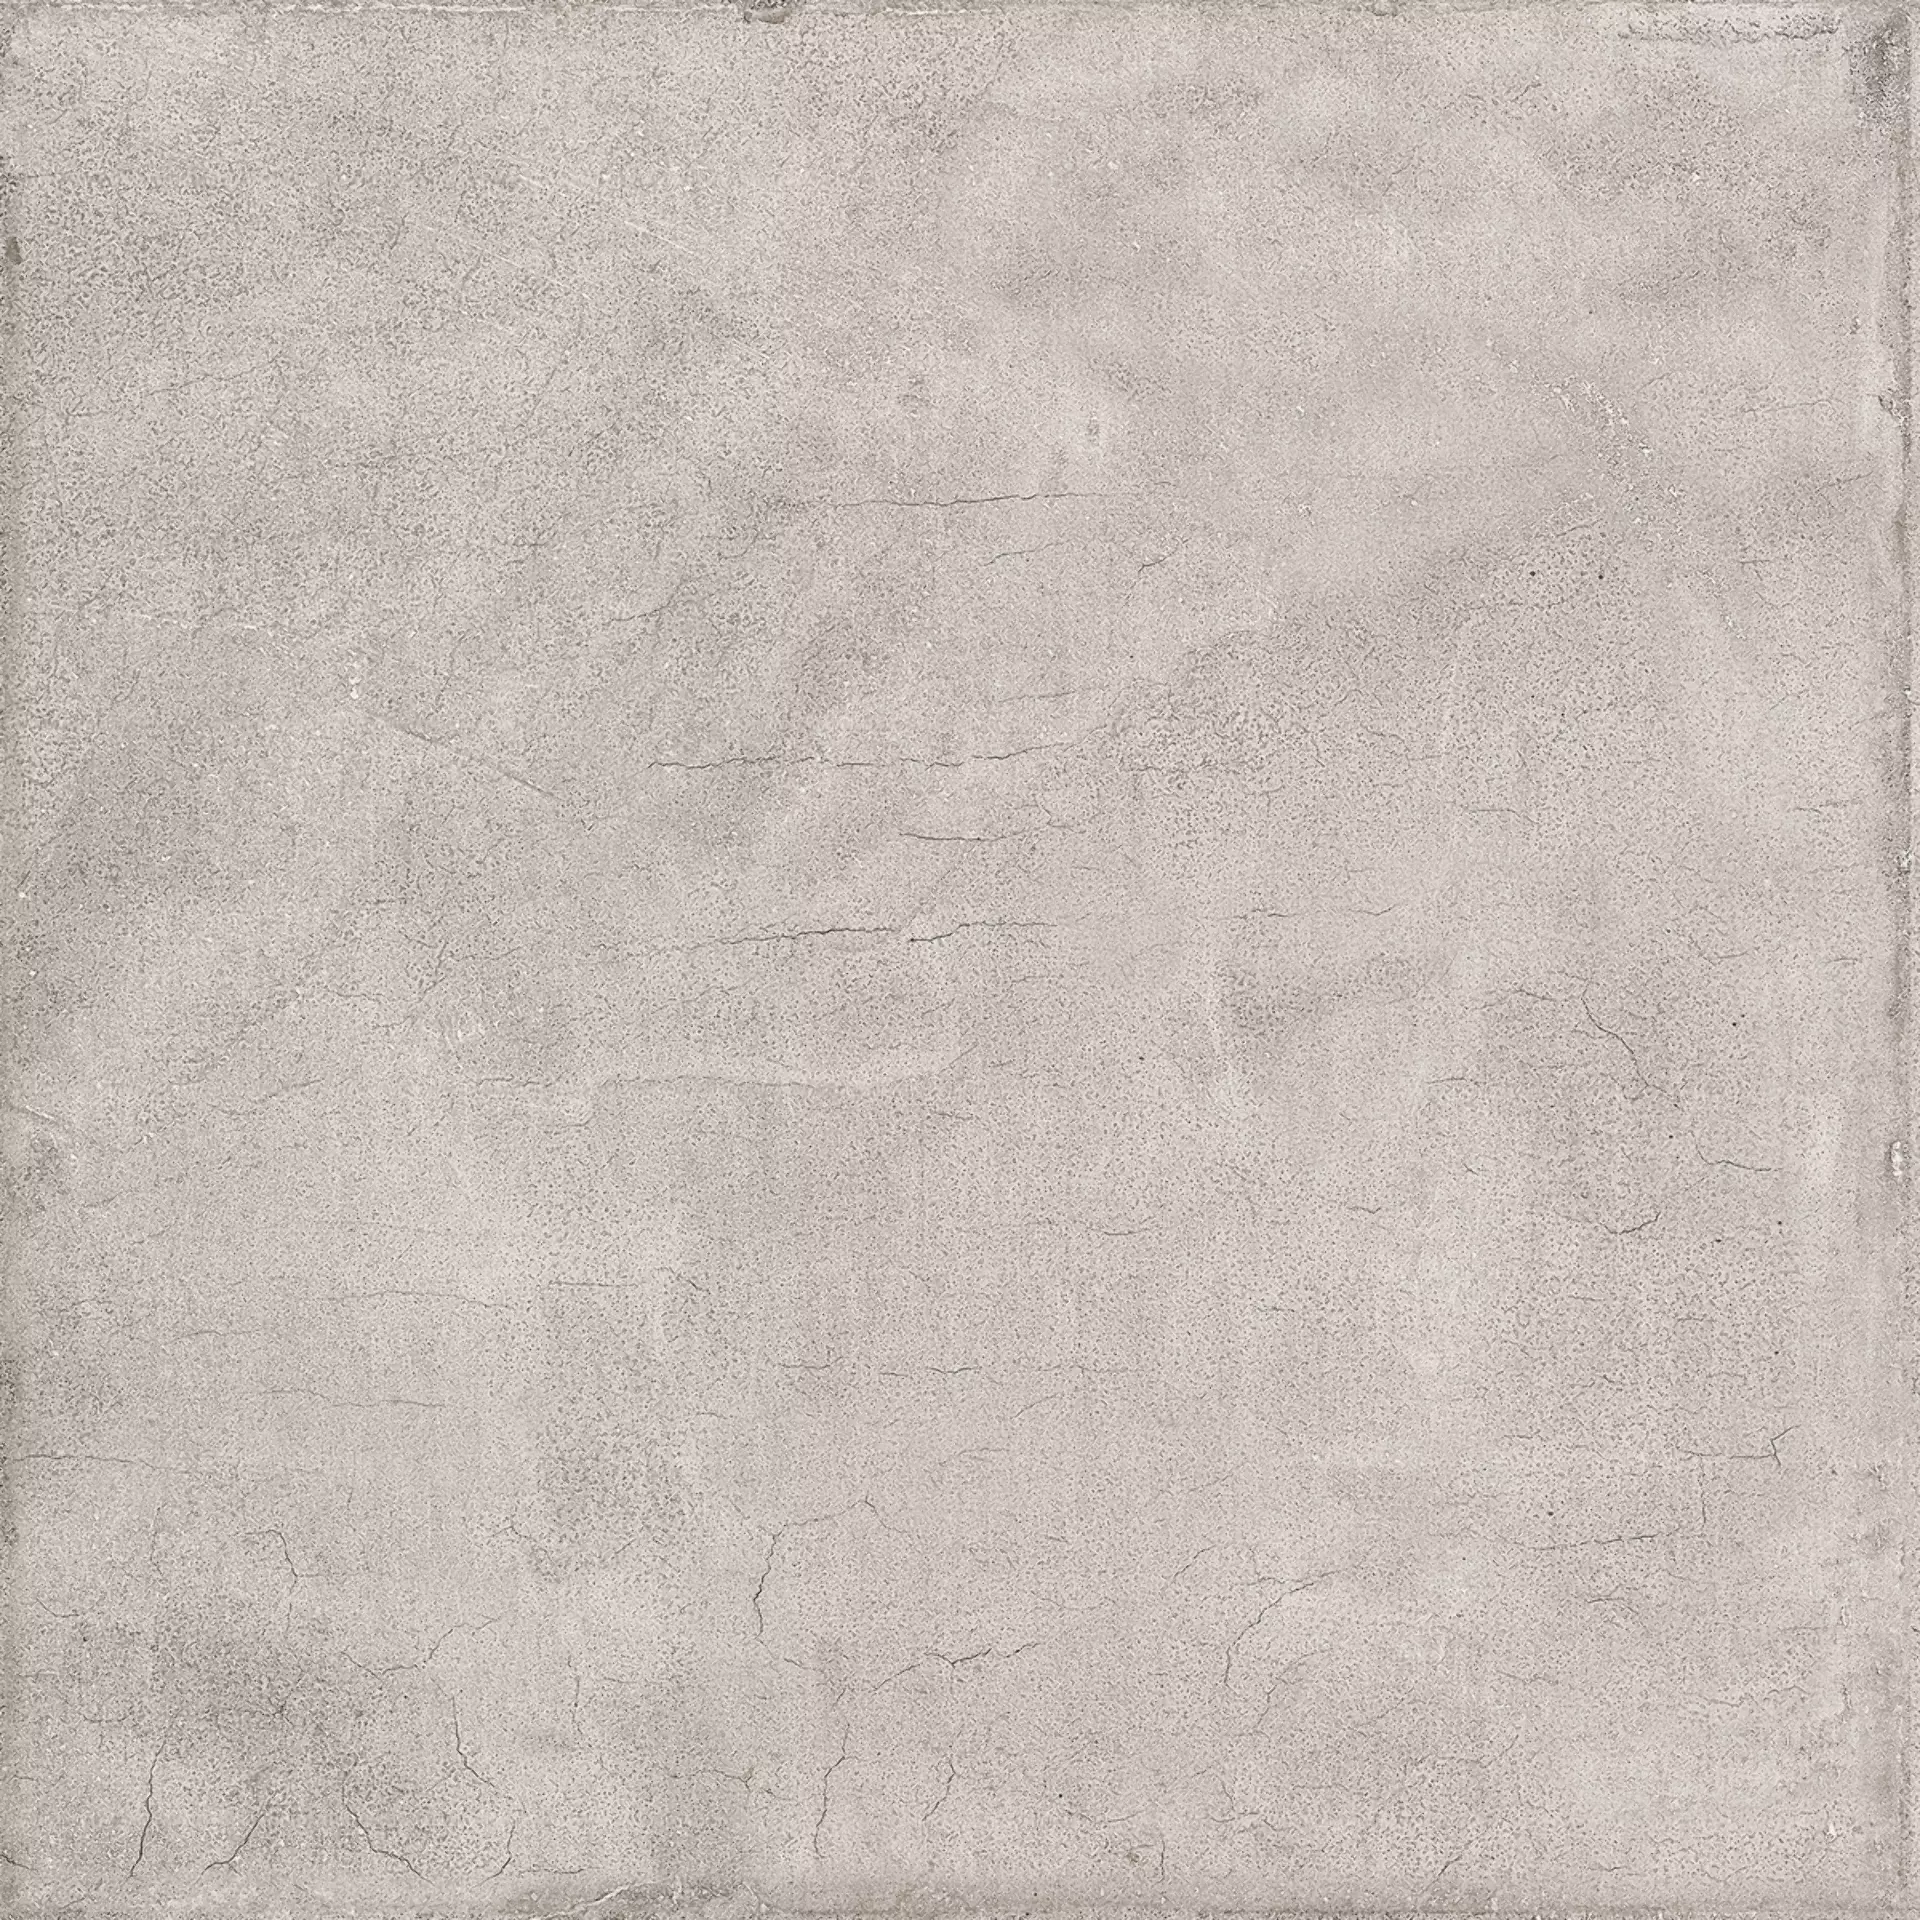 Sant Agostino Set Concrete Pearl Natural CSASCPEA60 60x60cm rectified 10mm